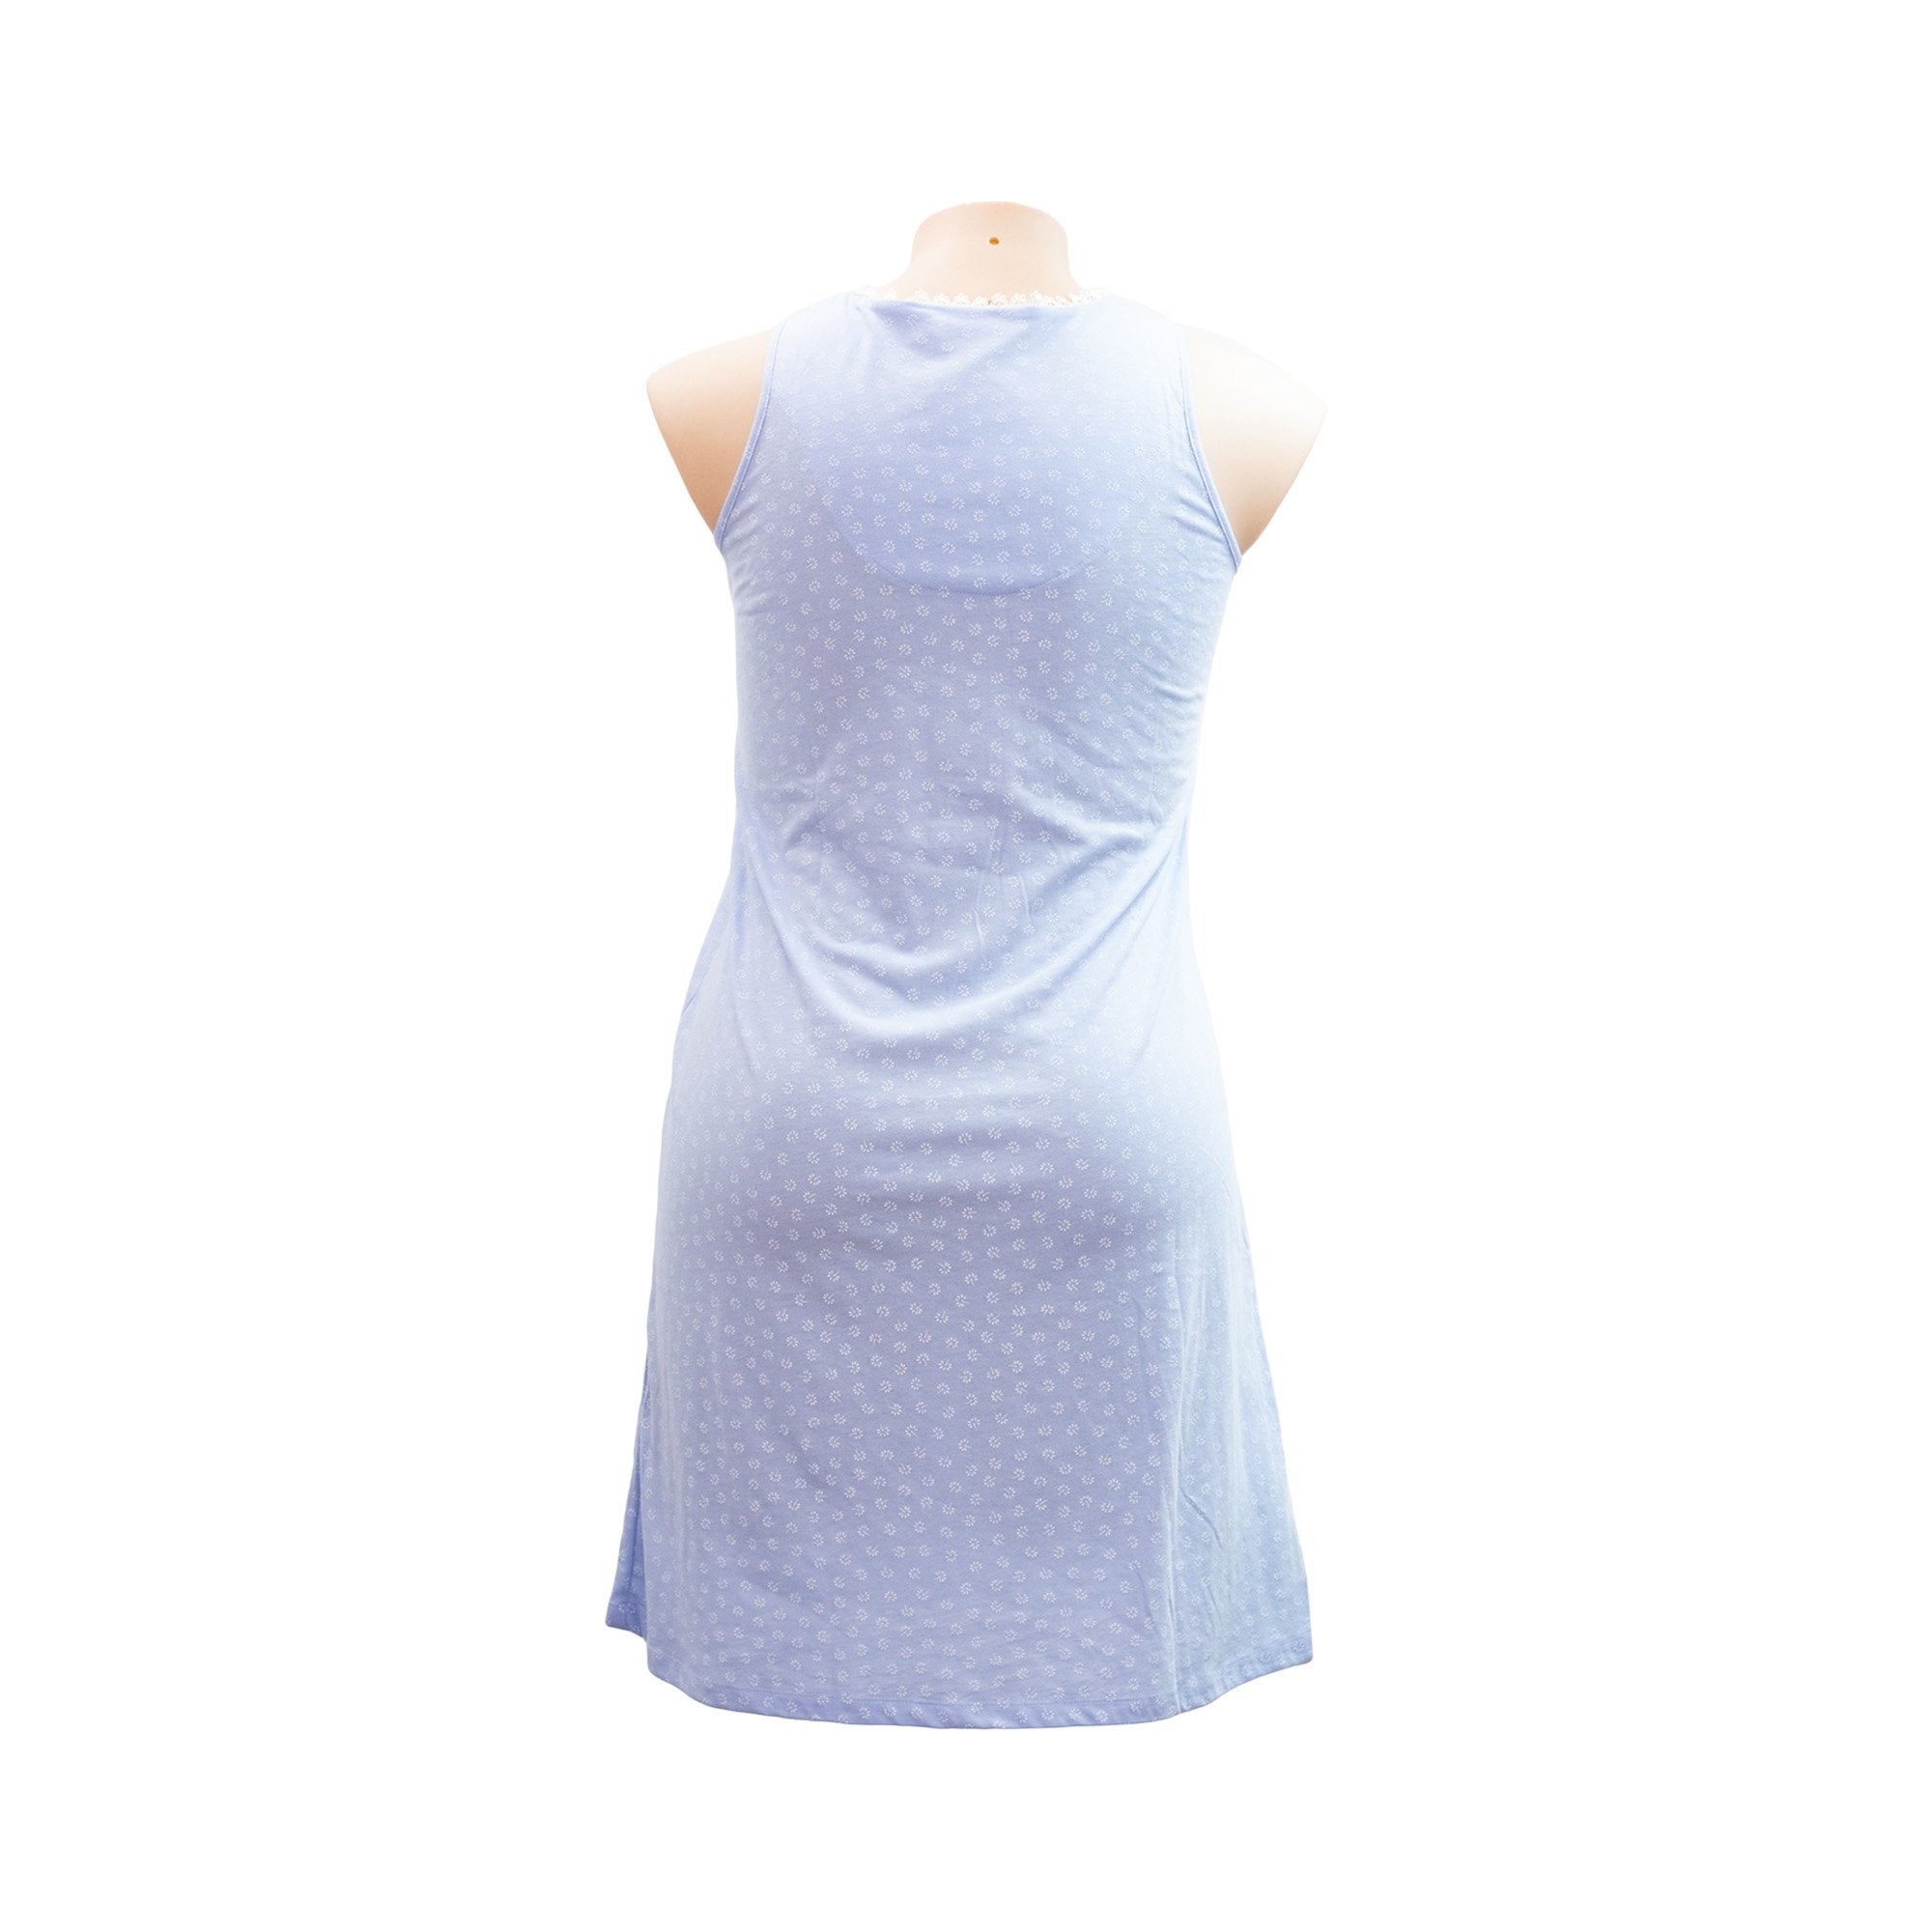 Givoni Daffodil Sleeveless - Nighties  Available at Illusions Lingerie